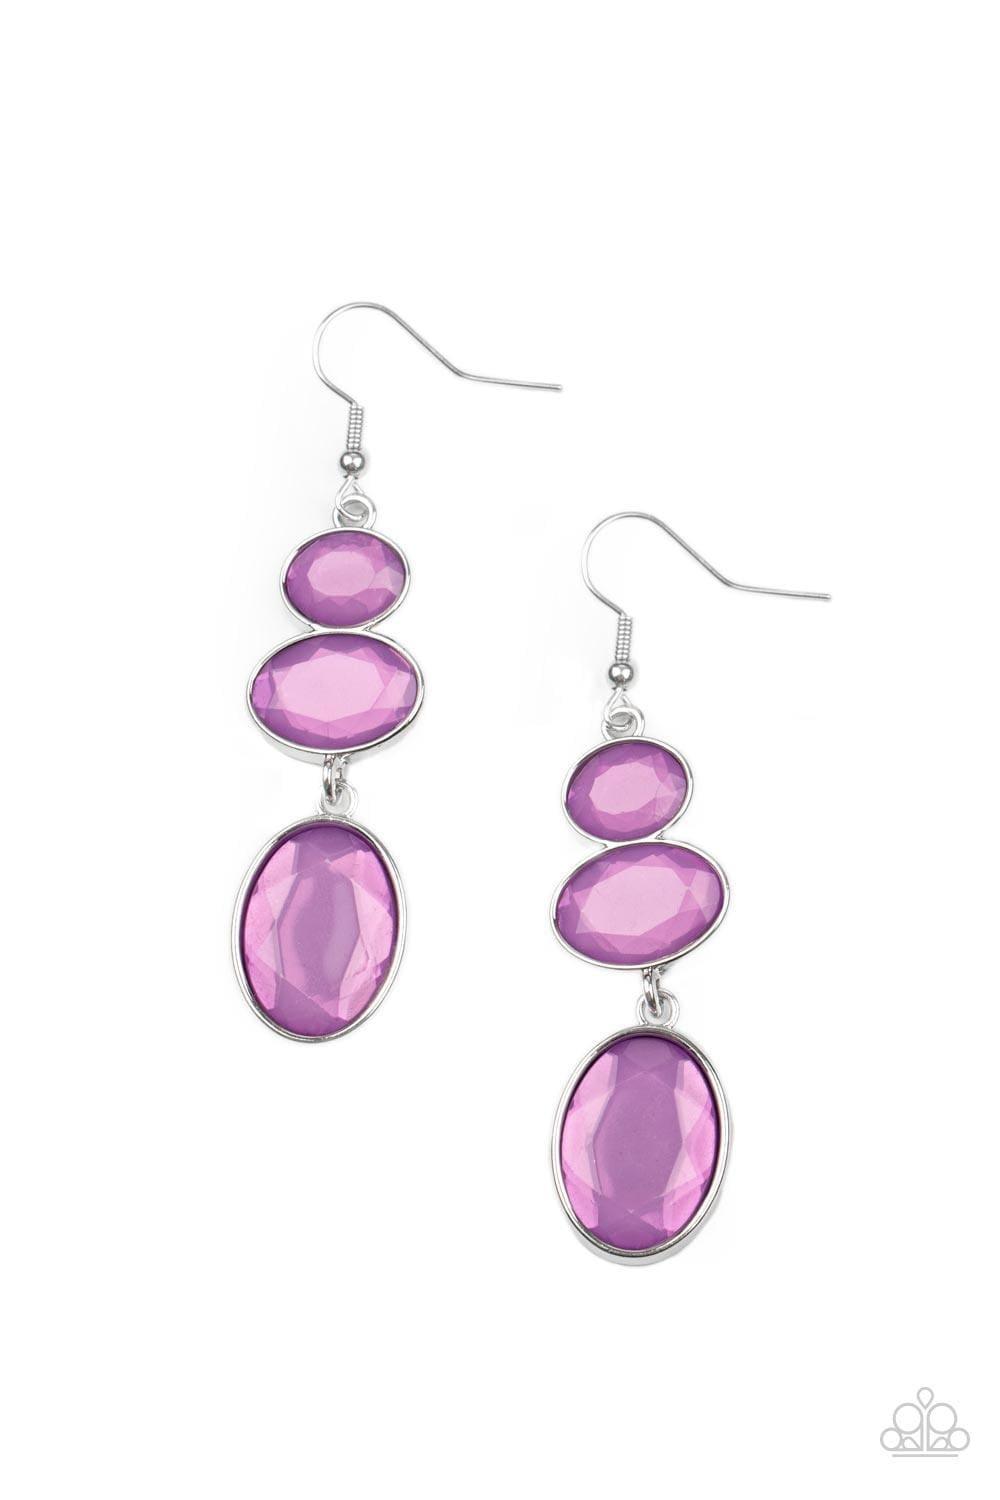 Paparazzi Accessories - Tiers Of Tranquility - Purple Earrings - Bling by JessieK